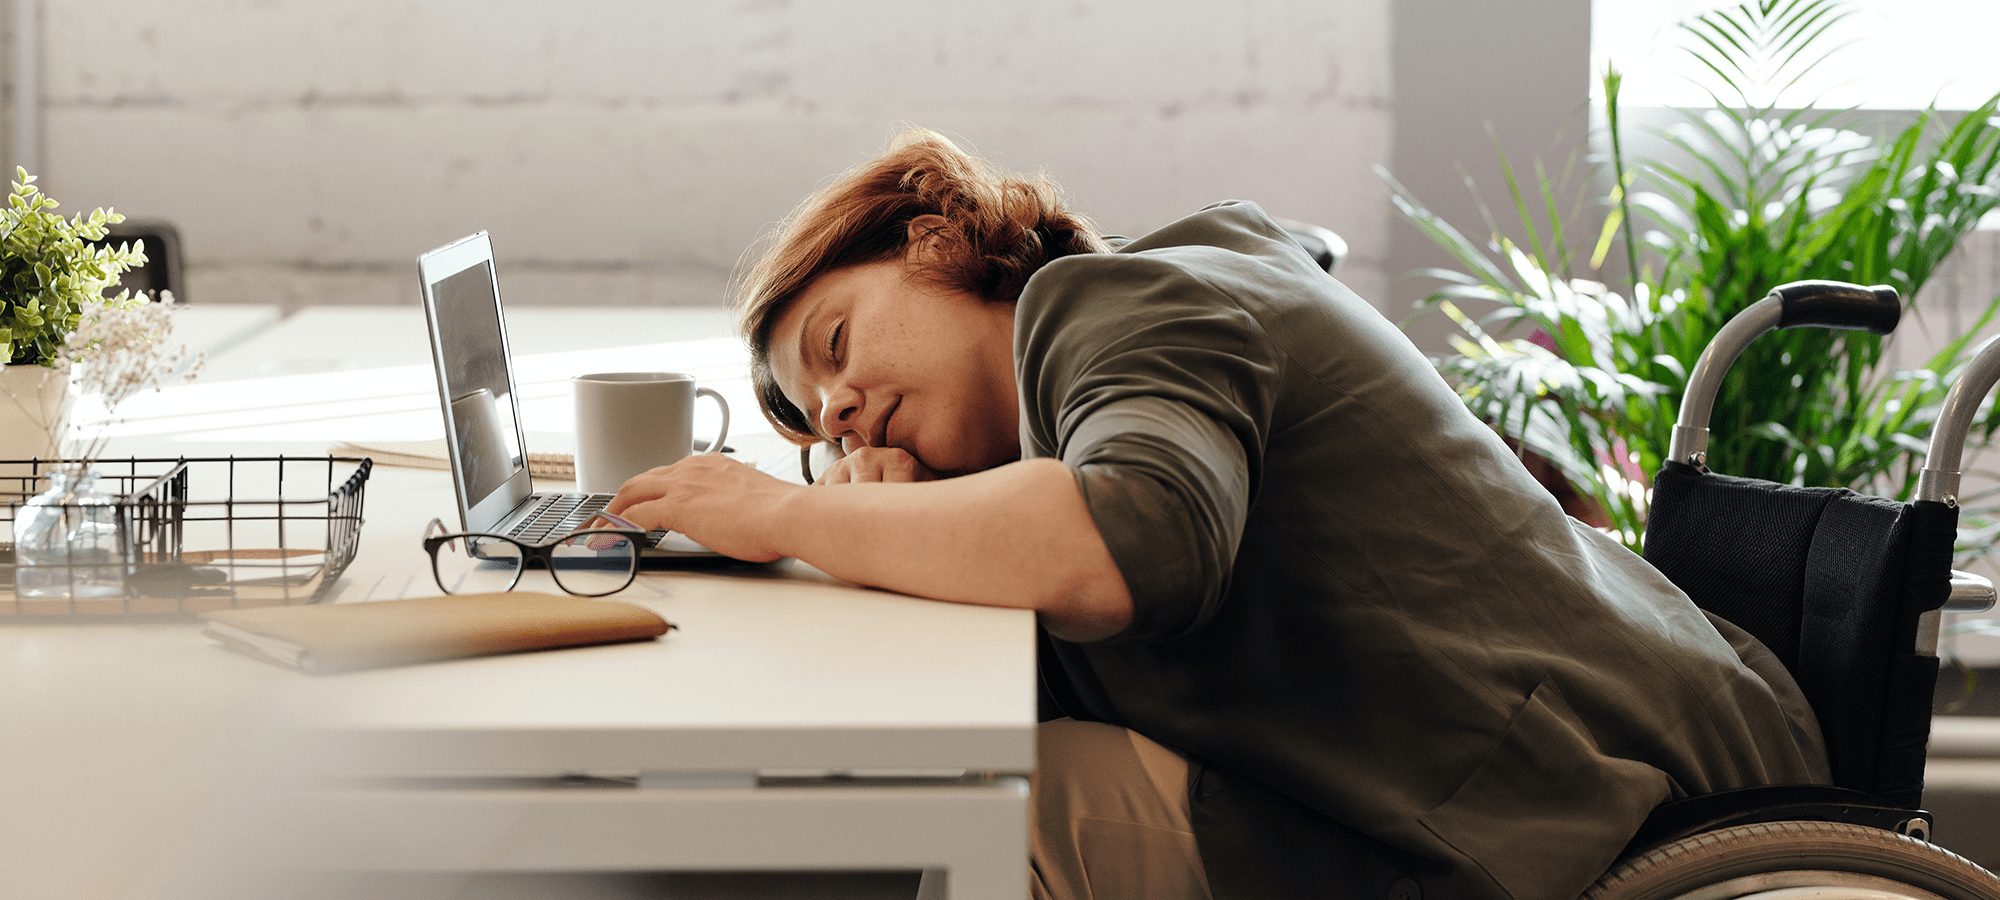 Employee feeling burnt out at work